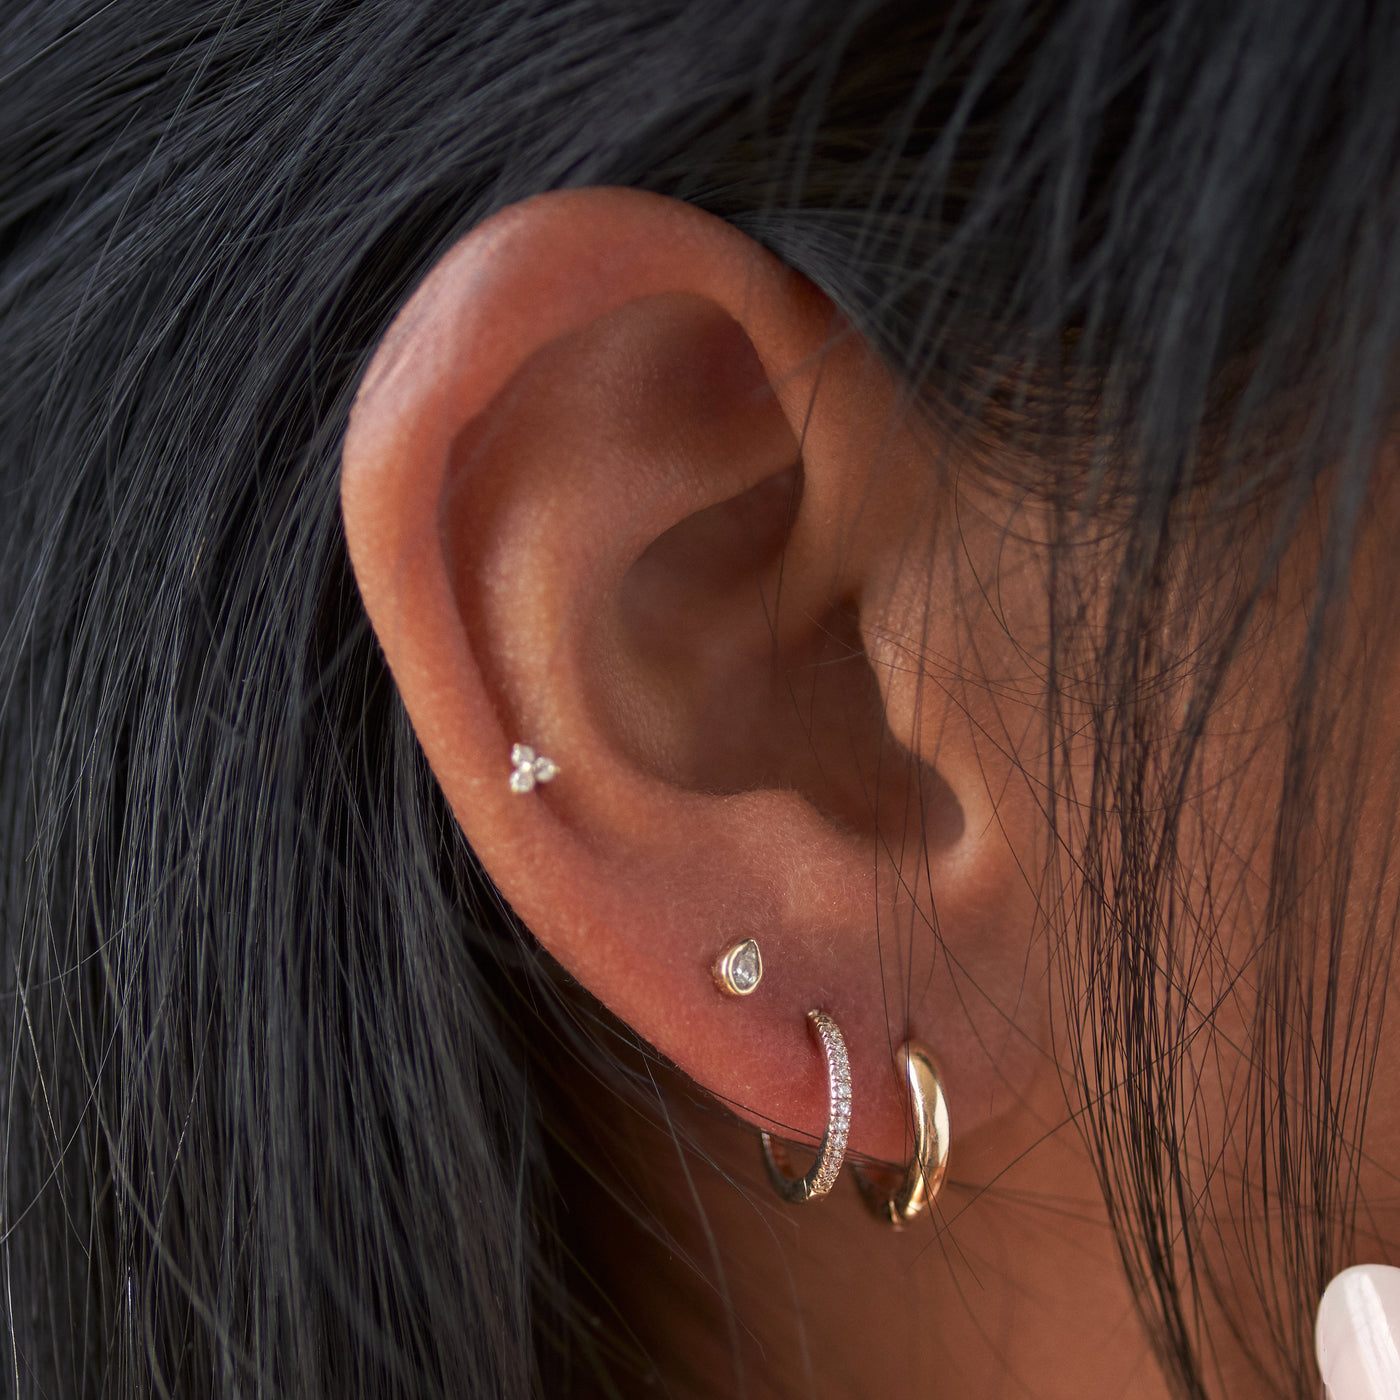 Ear show with 4 piercings. Two gold hoops and two stud earrings